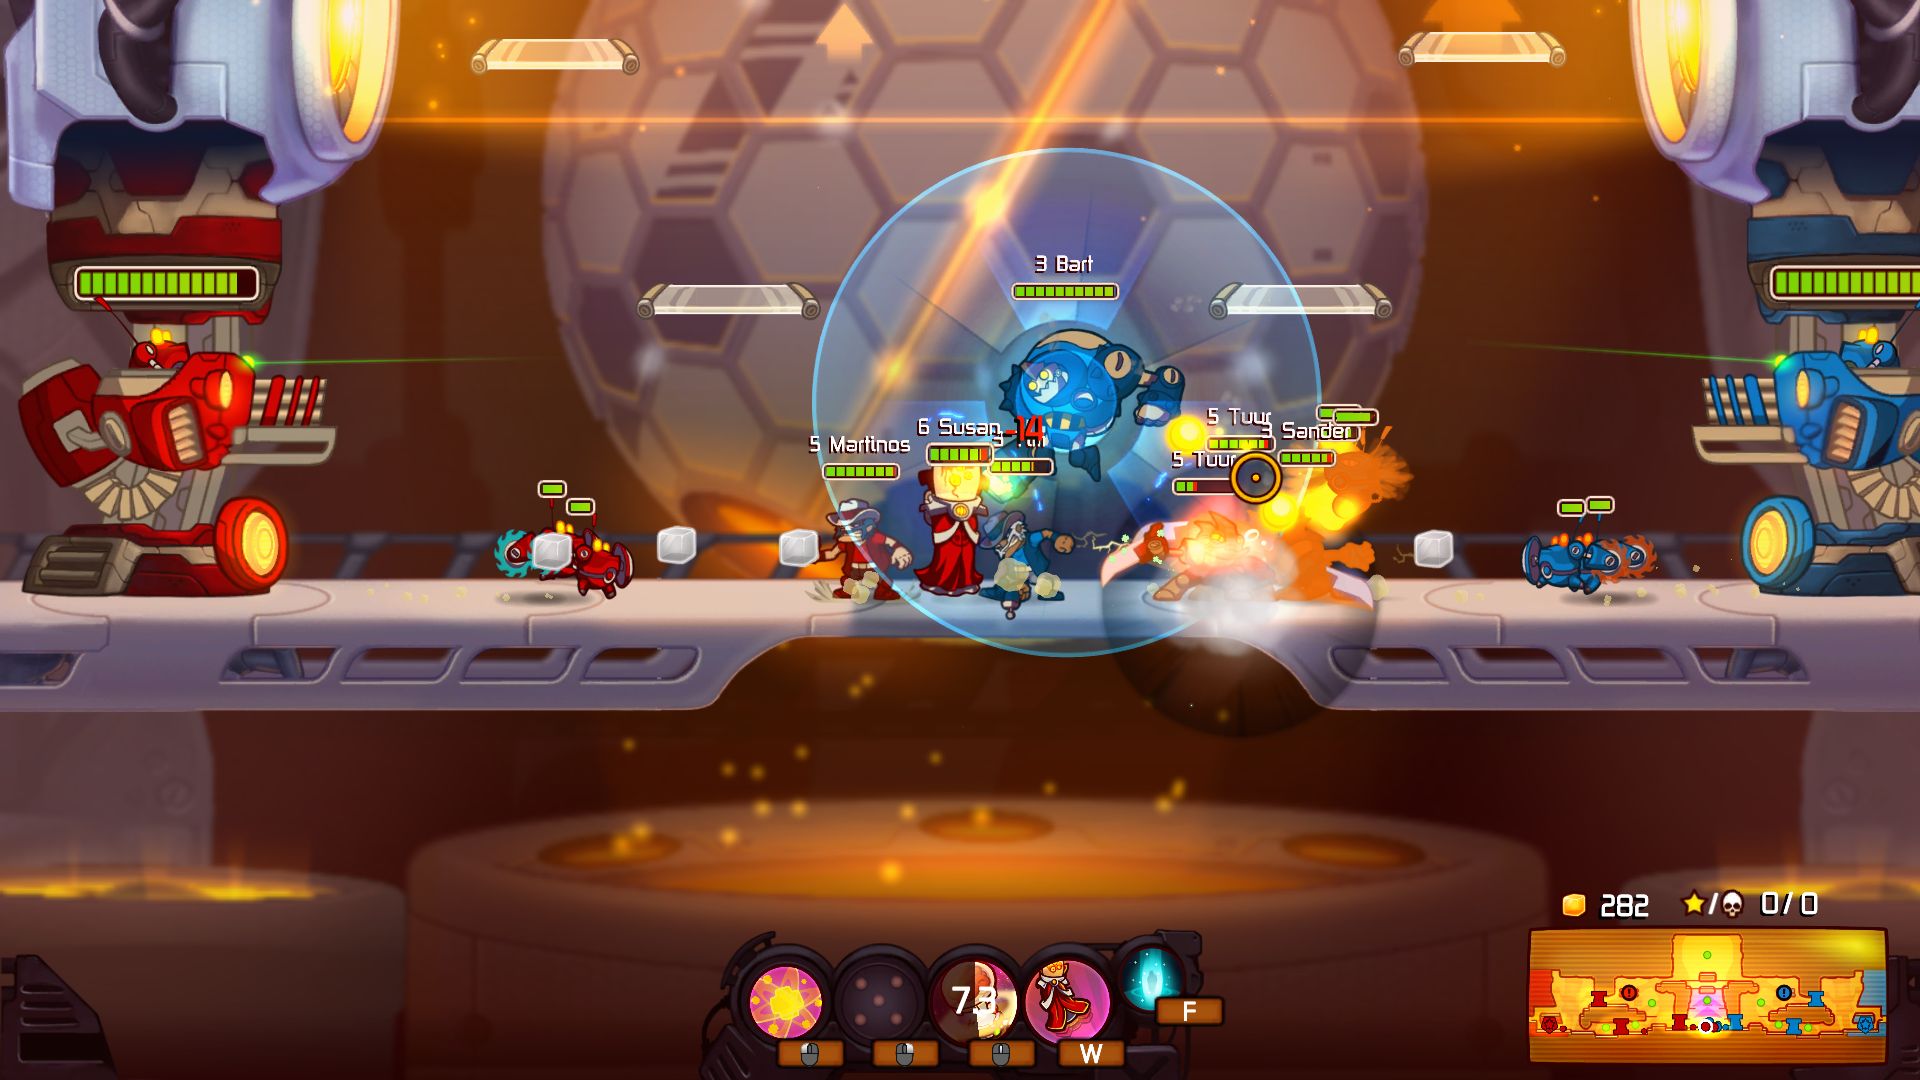 Awesomenauts Backgrounds, Compatible - PC, Mobile, Gadgets| 1920x1080 px